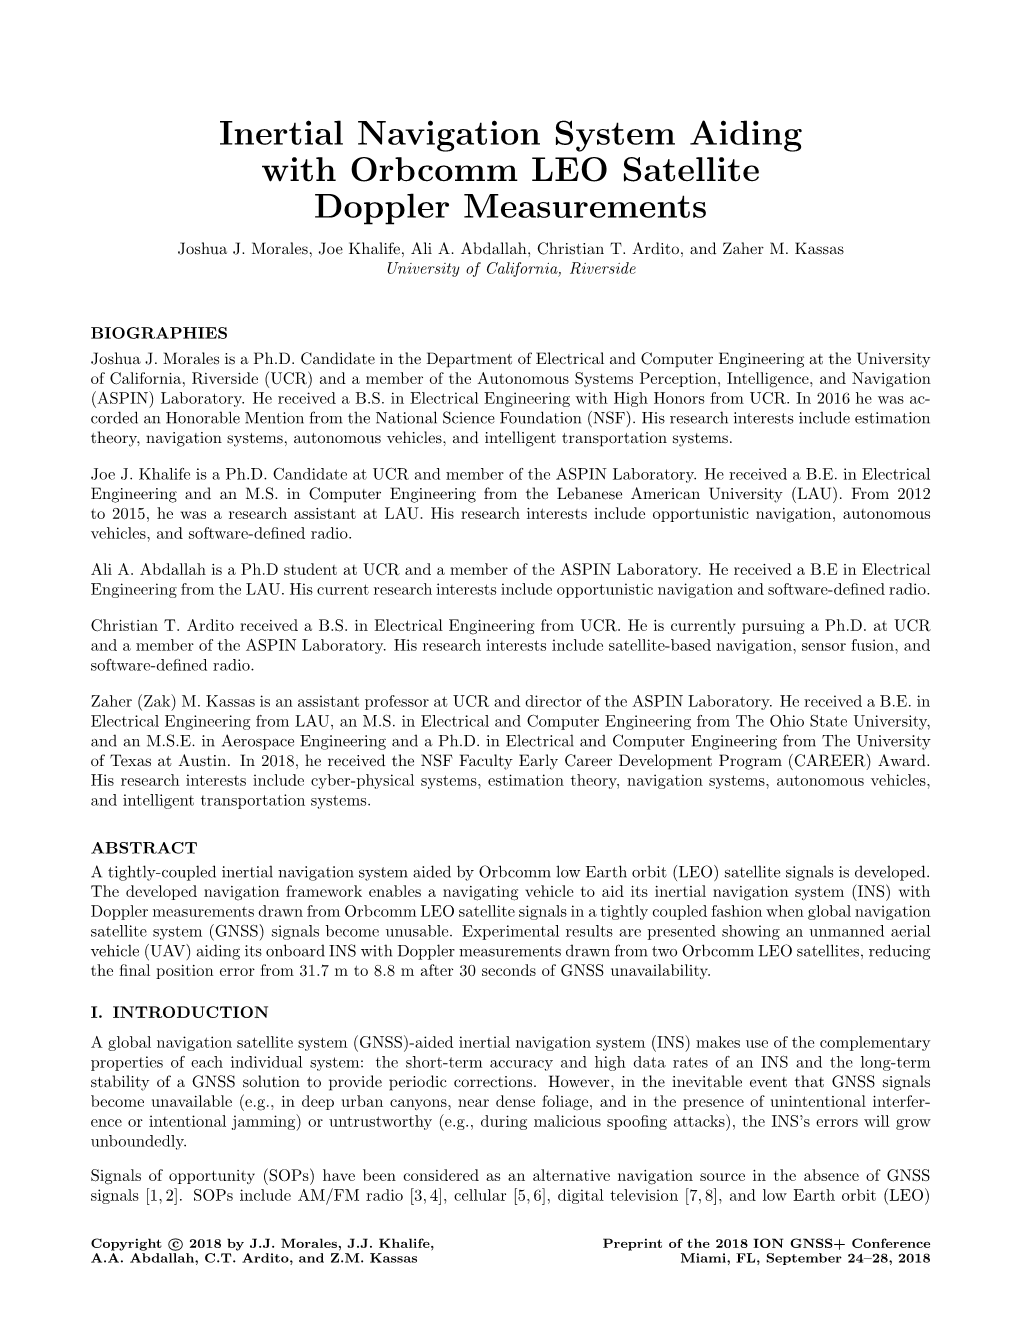 Inertial Navigation System Aiding with Orbcomm LEO Satellite Doppler Measurements